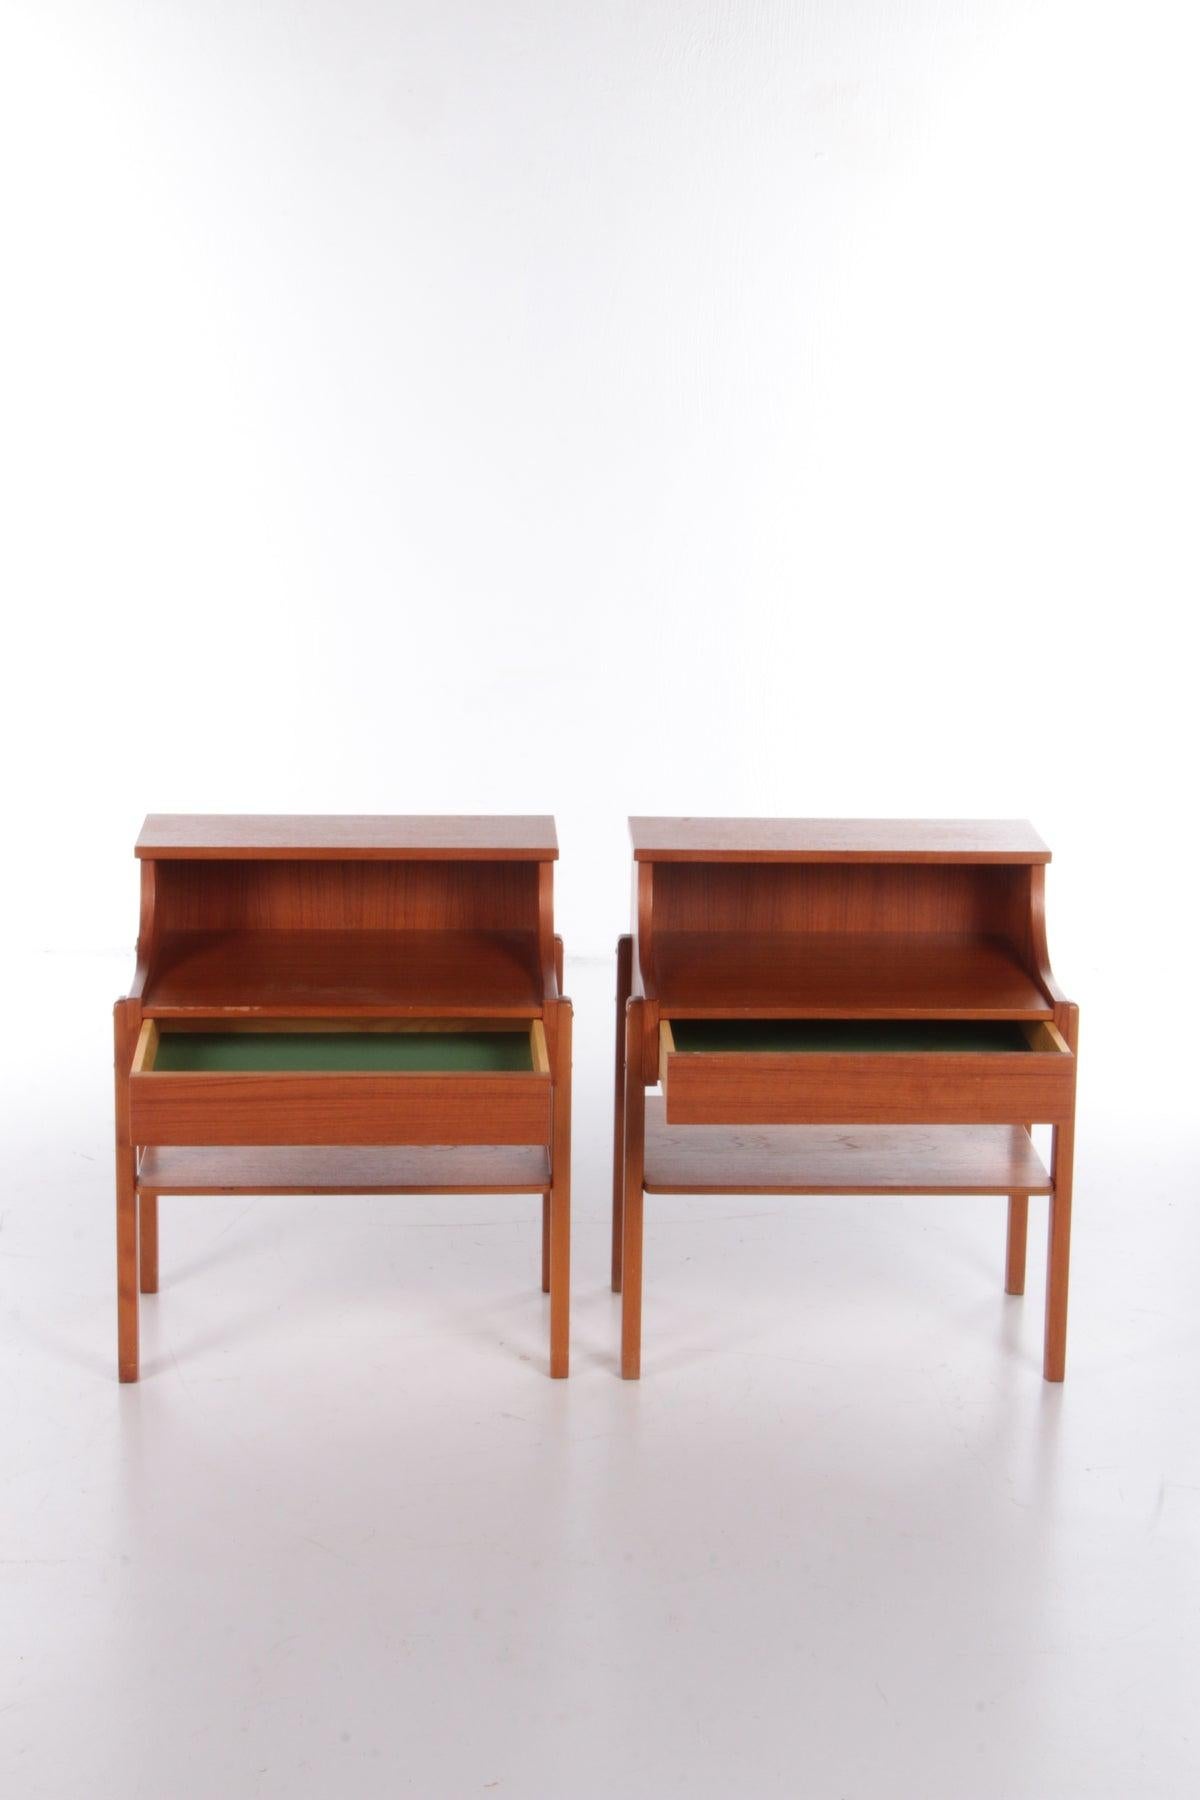 Mid-Century Modern Pair of Scandinavian Bedside Tables in Teak by AB Carlstrom & Co, 1960 For Sale